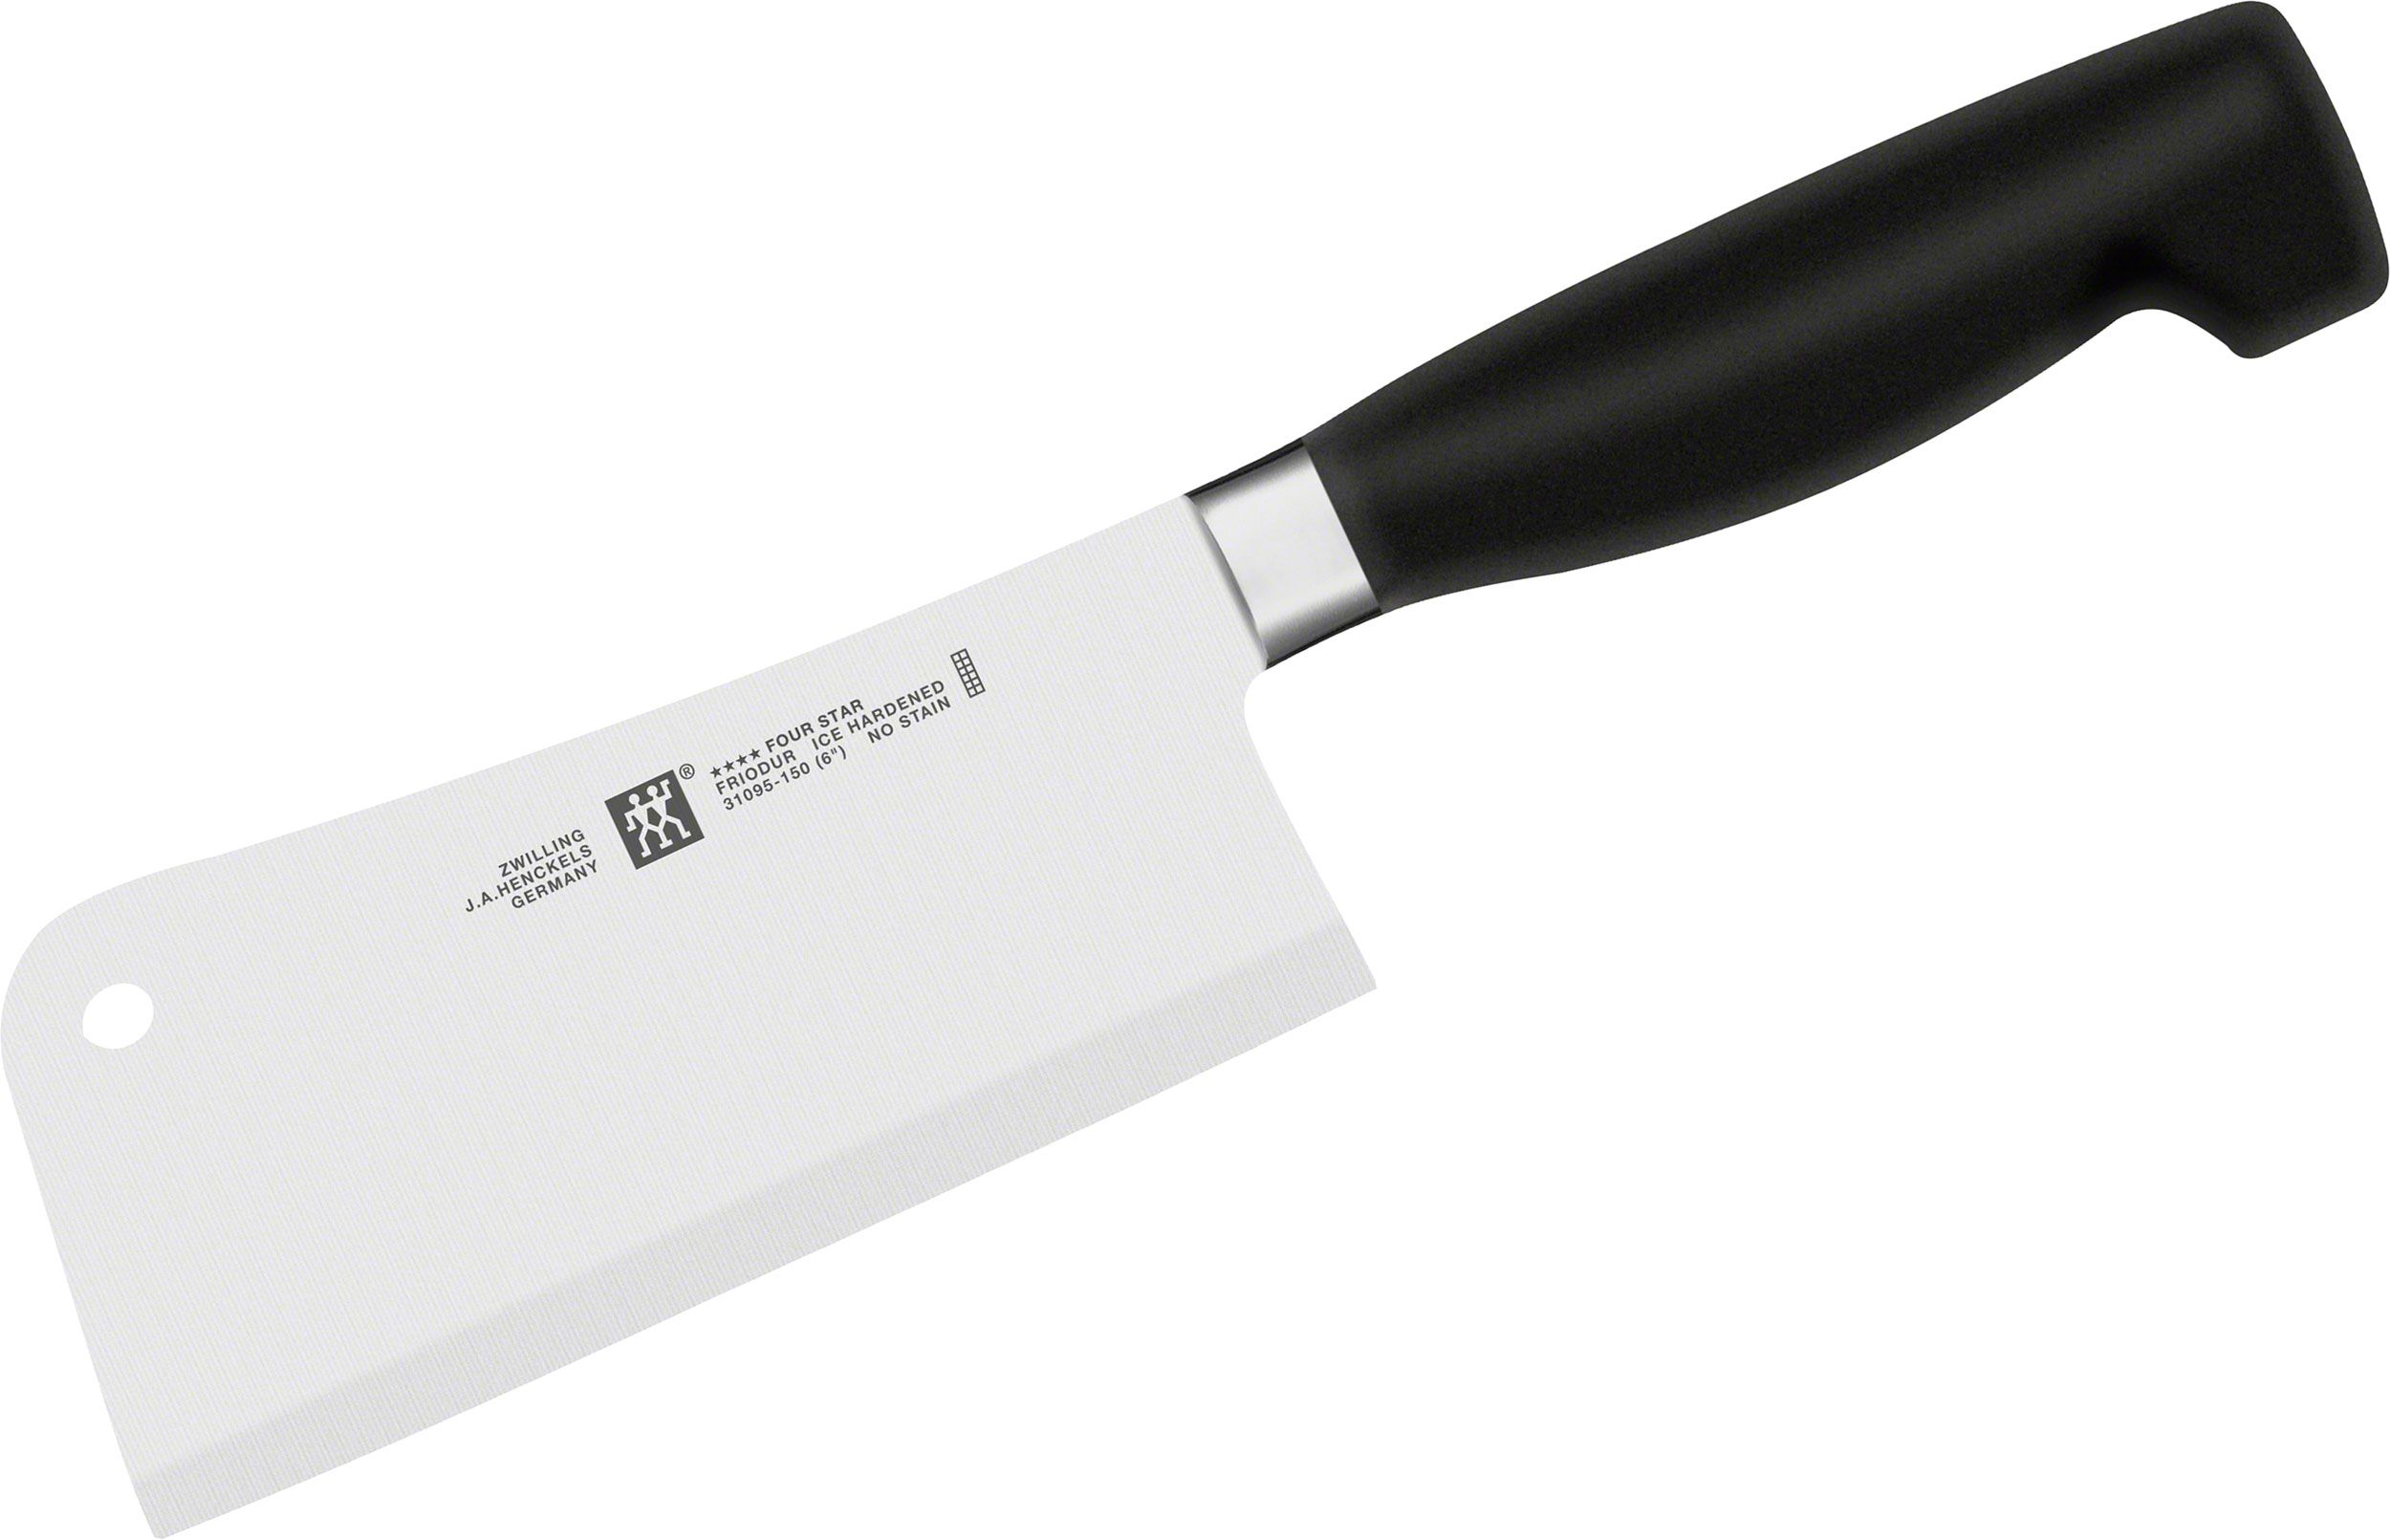 Zwilling J.A. Henckels TWIN Four Star 6 Meat Cleaver - KnifeCenter -  31095-150 - Discontinued